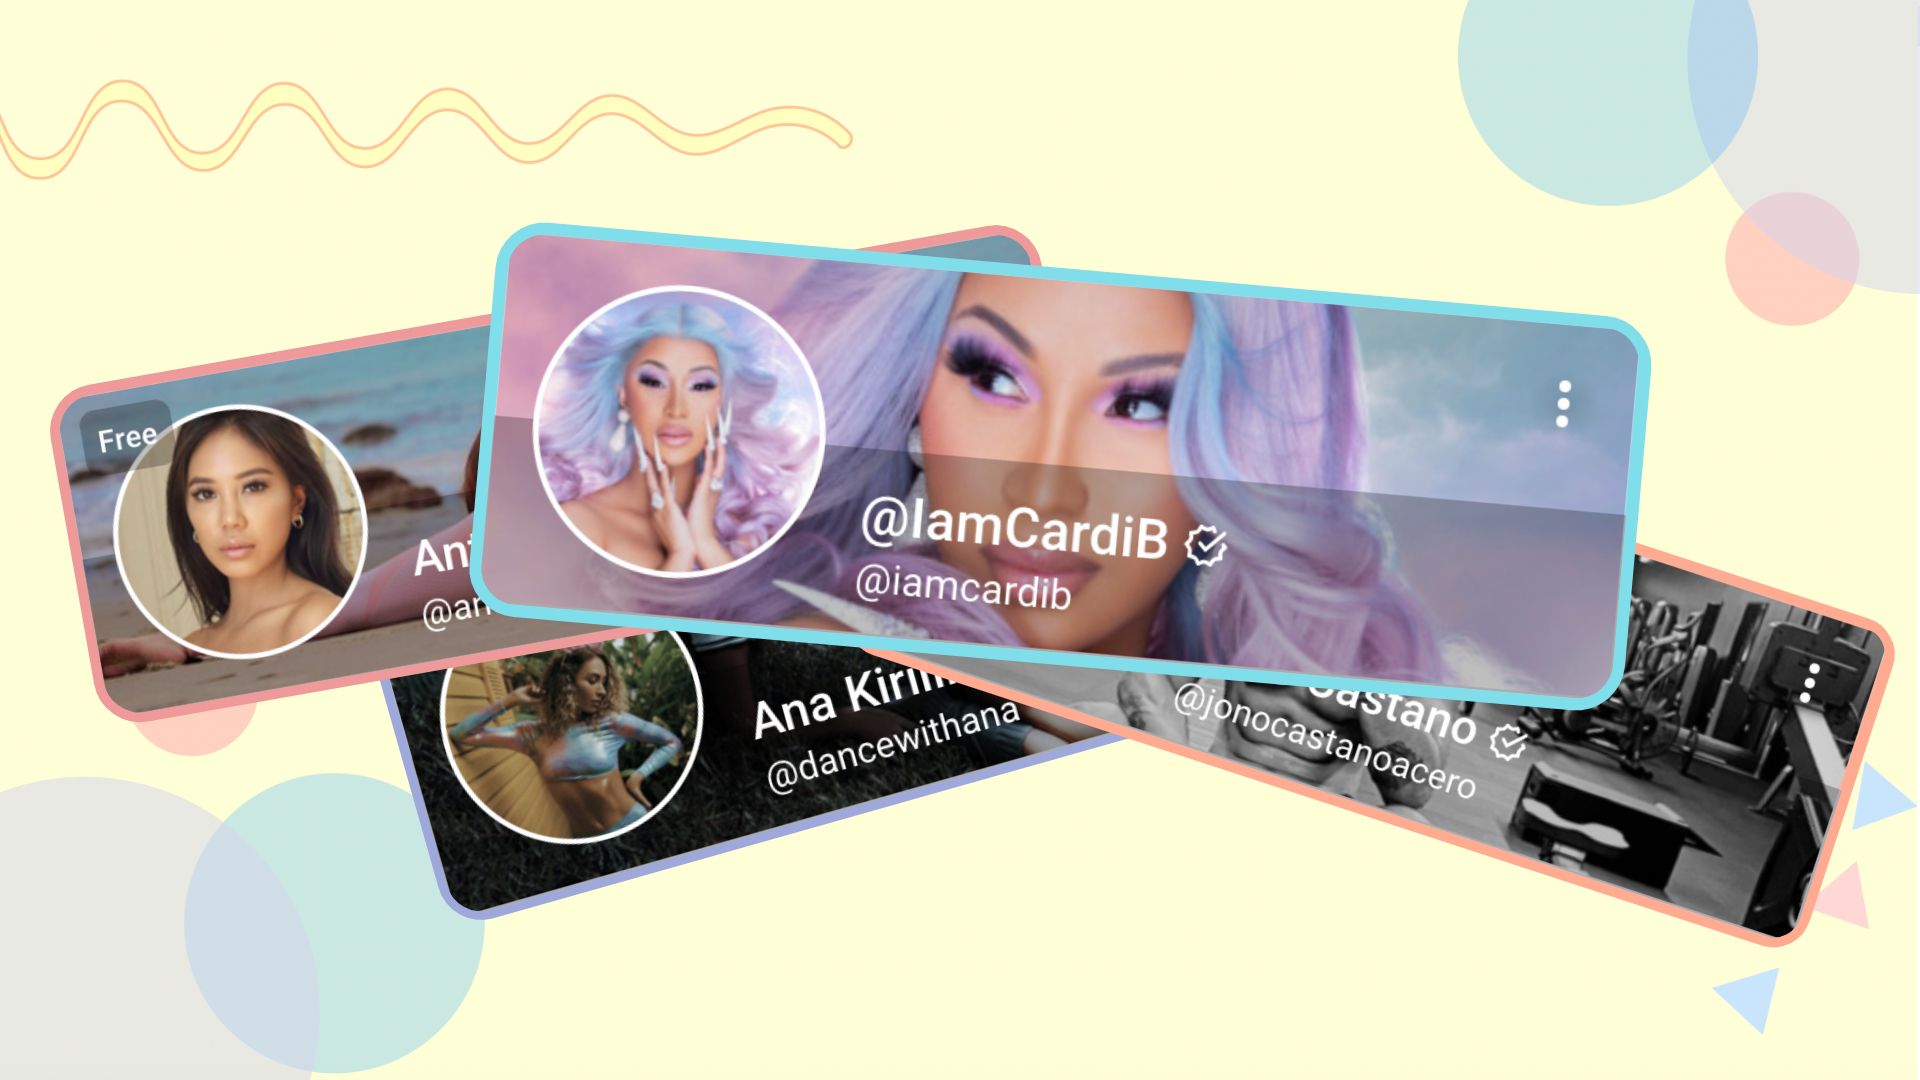 Only fans layout